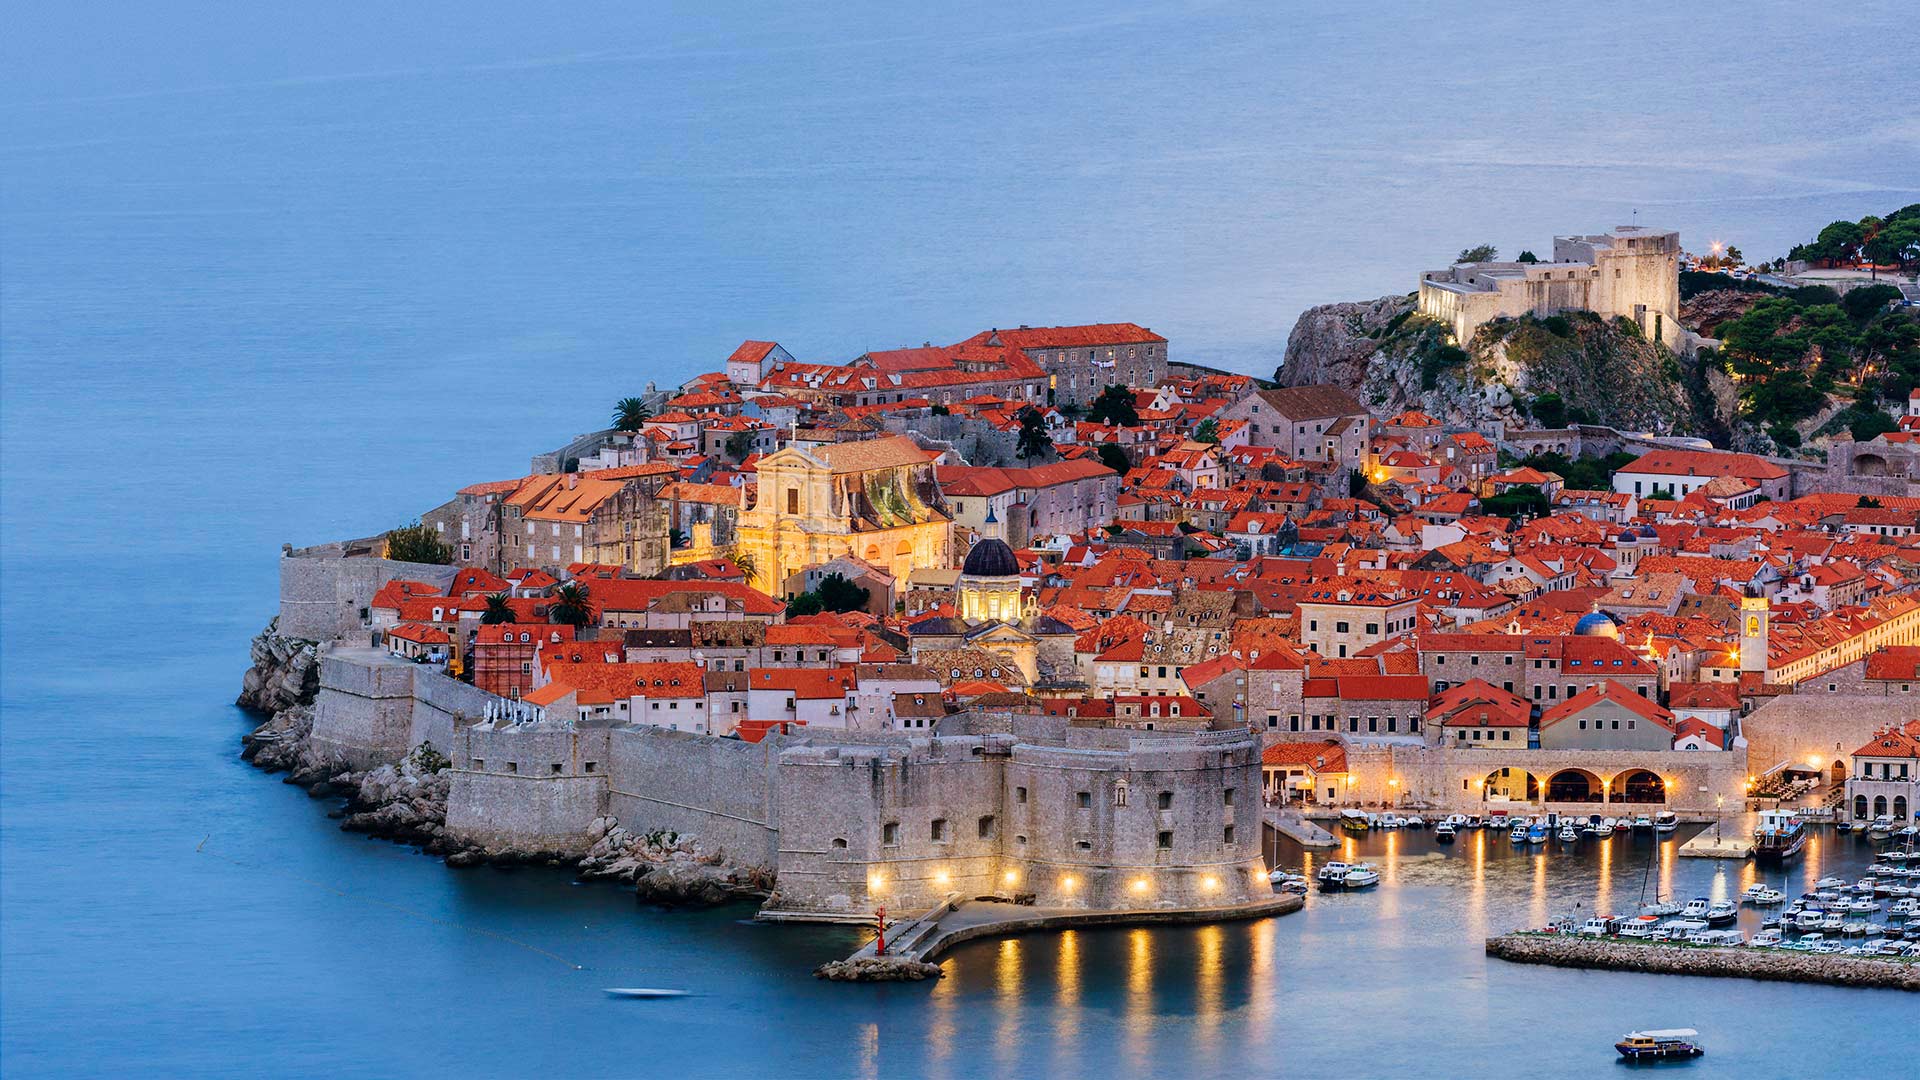 The Old Town of Dubrovnik, Croatia (? Jeremy Woodhouse/Getty Images)